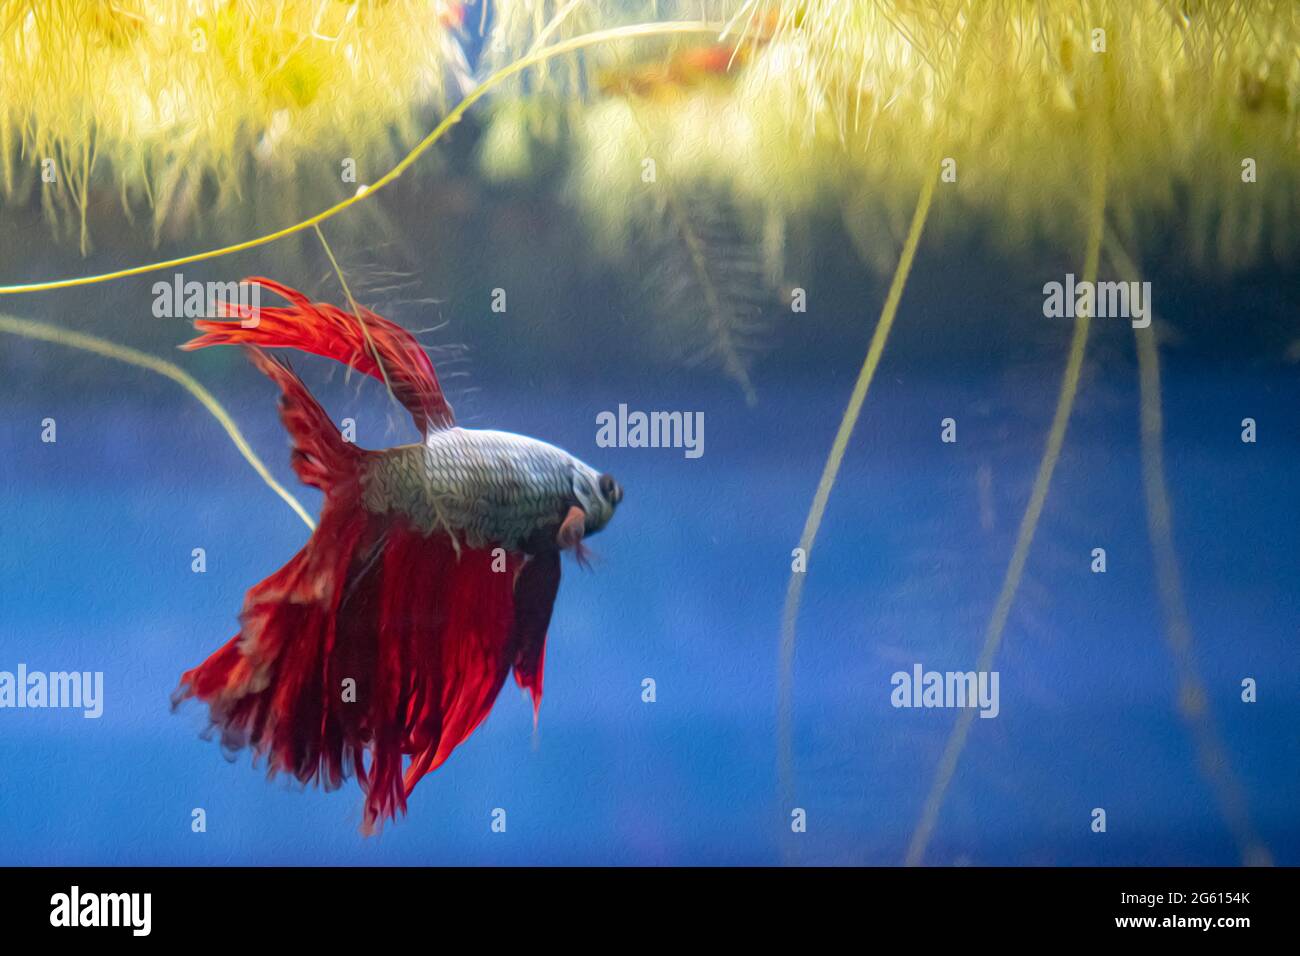 Deep red Dragon Betta fish with a teal body, in-home aquarium. Swimming to the top of the aquarium with floating plants Stock Photo